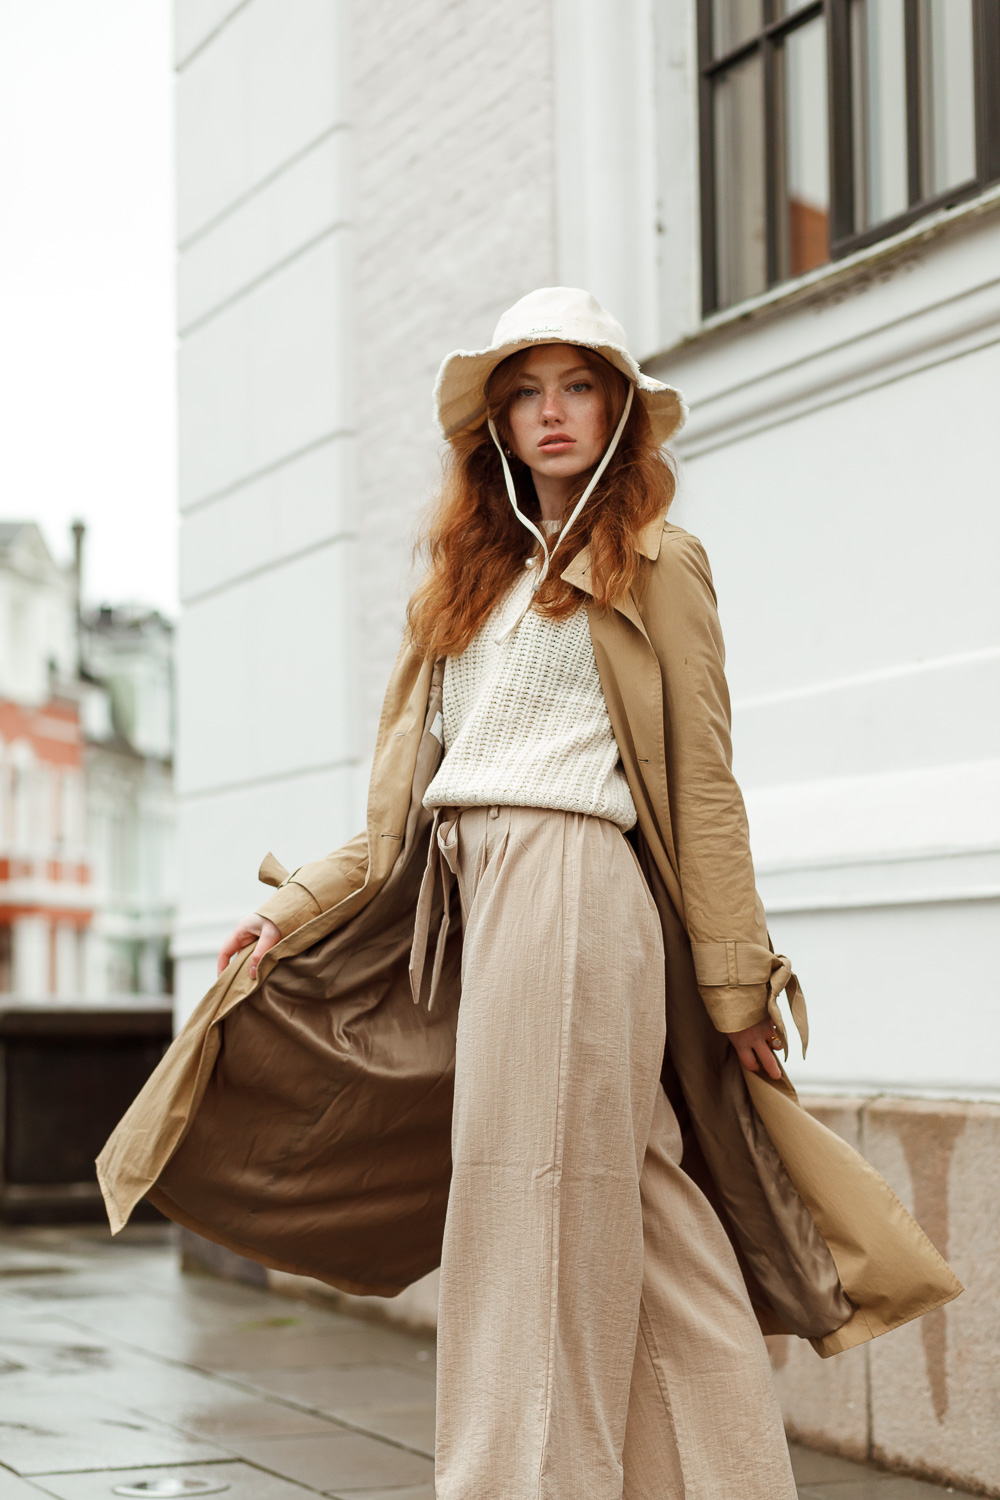 Fashion and beauty photography Oslo, Trondheim, Bergen and on location in Norway – Portrait, beauty, fashion, lookbook and product photography and film by Stephanie Verhart